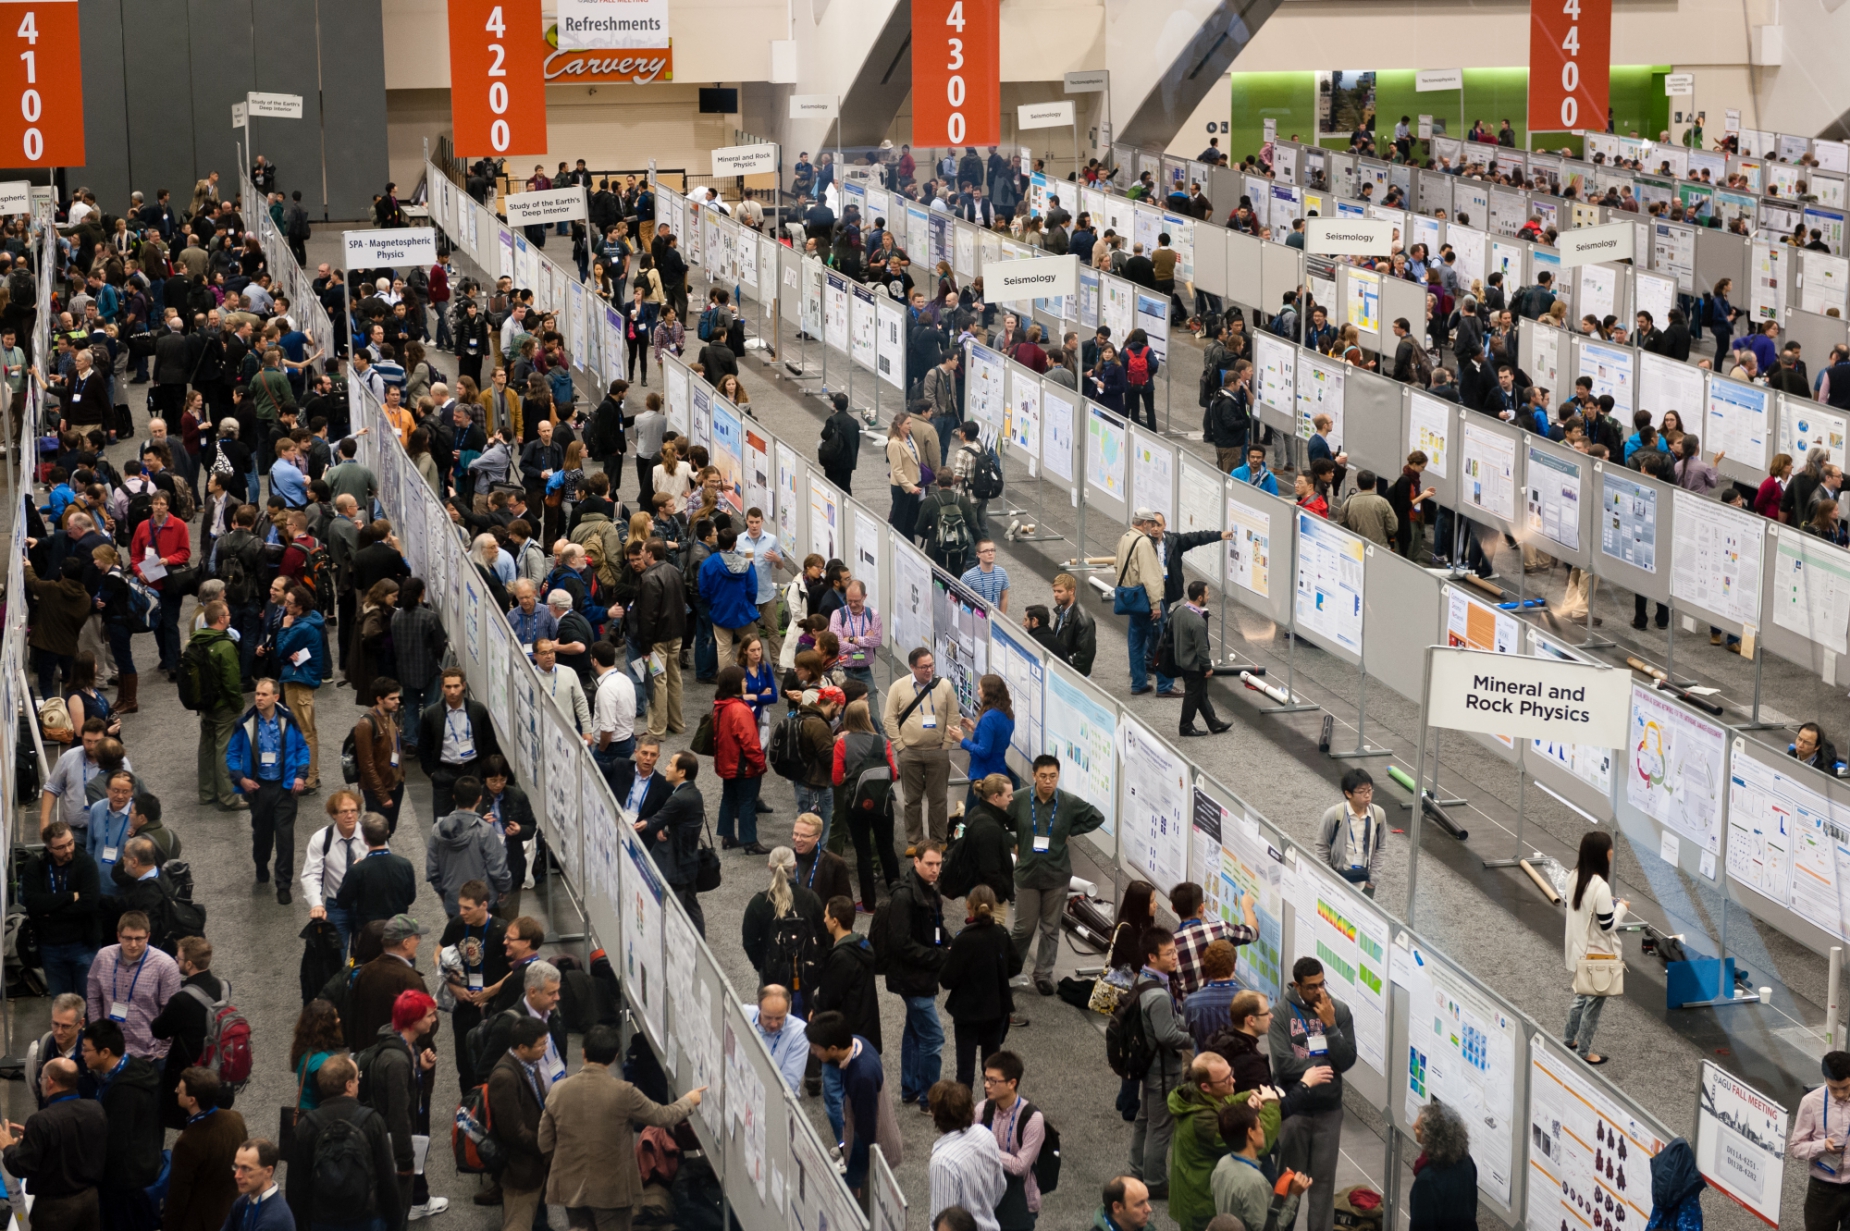 The poster hall in San Francisco's Moscone Convention Centre (Source: American Geophysical Union)